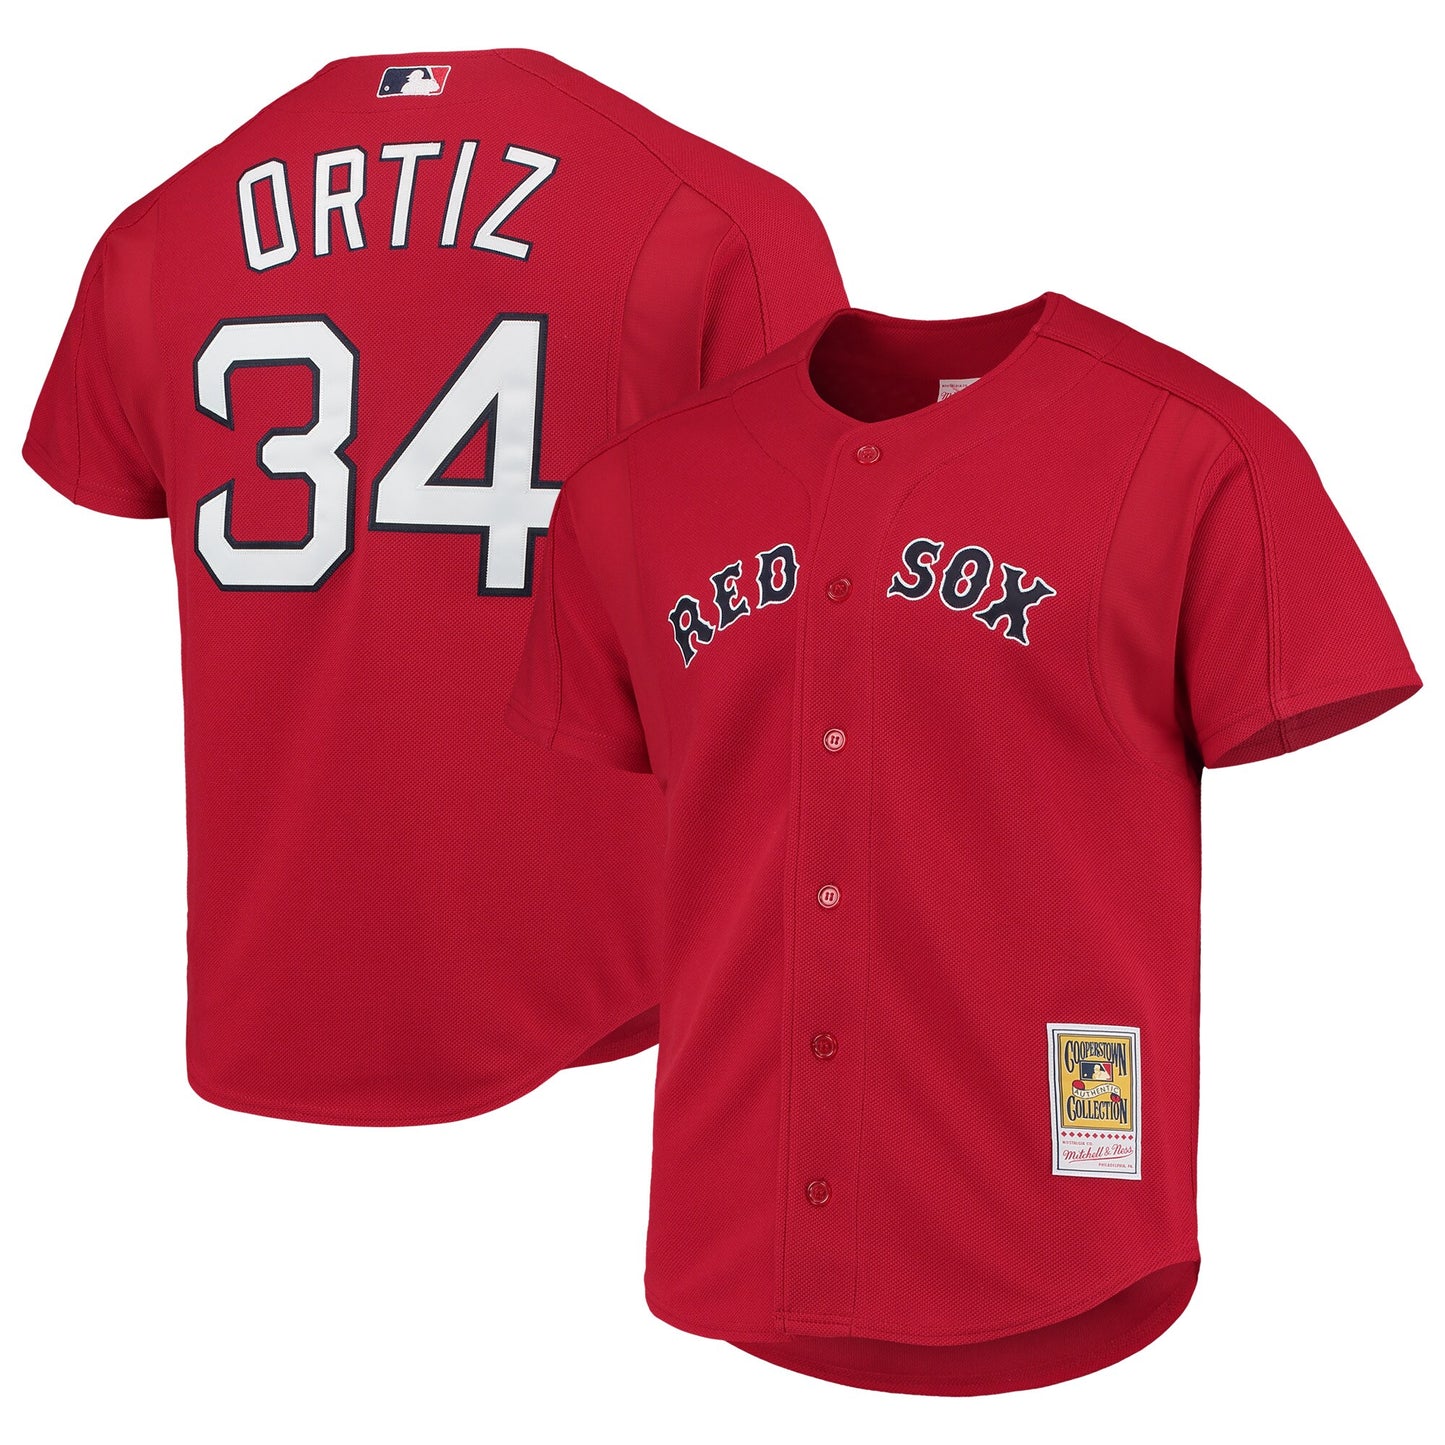 David Ortiz Boston Red Sox Mitchell & Ness Cooperstown Collection Mesh Batting Practice Button-Up Jersey - Red